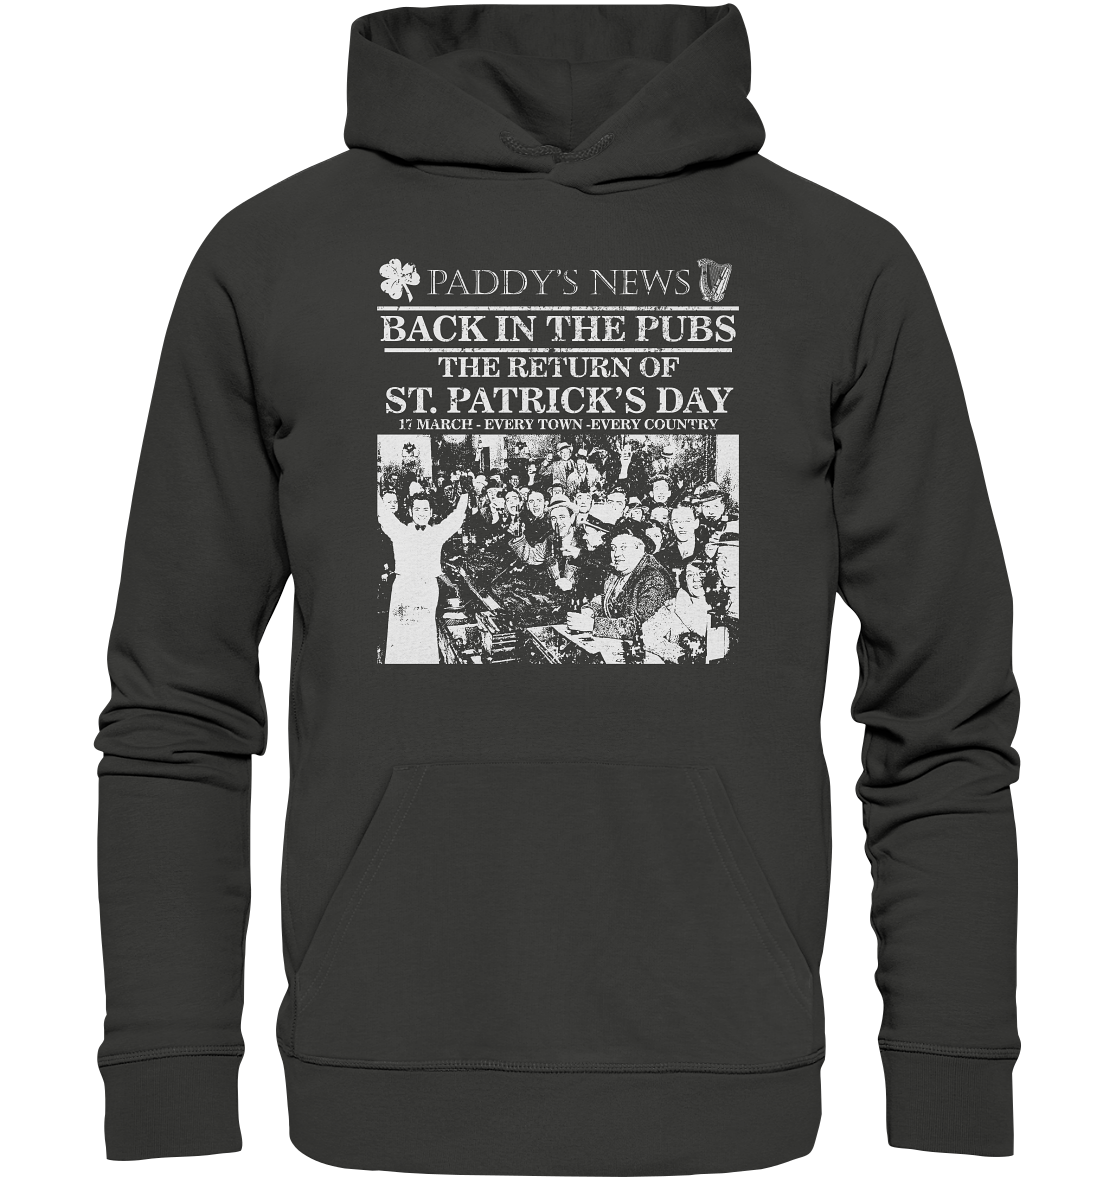 Back In The Pubs "The Return Of St. Patrick's Day" - Premium Unisex Hoodie